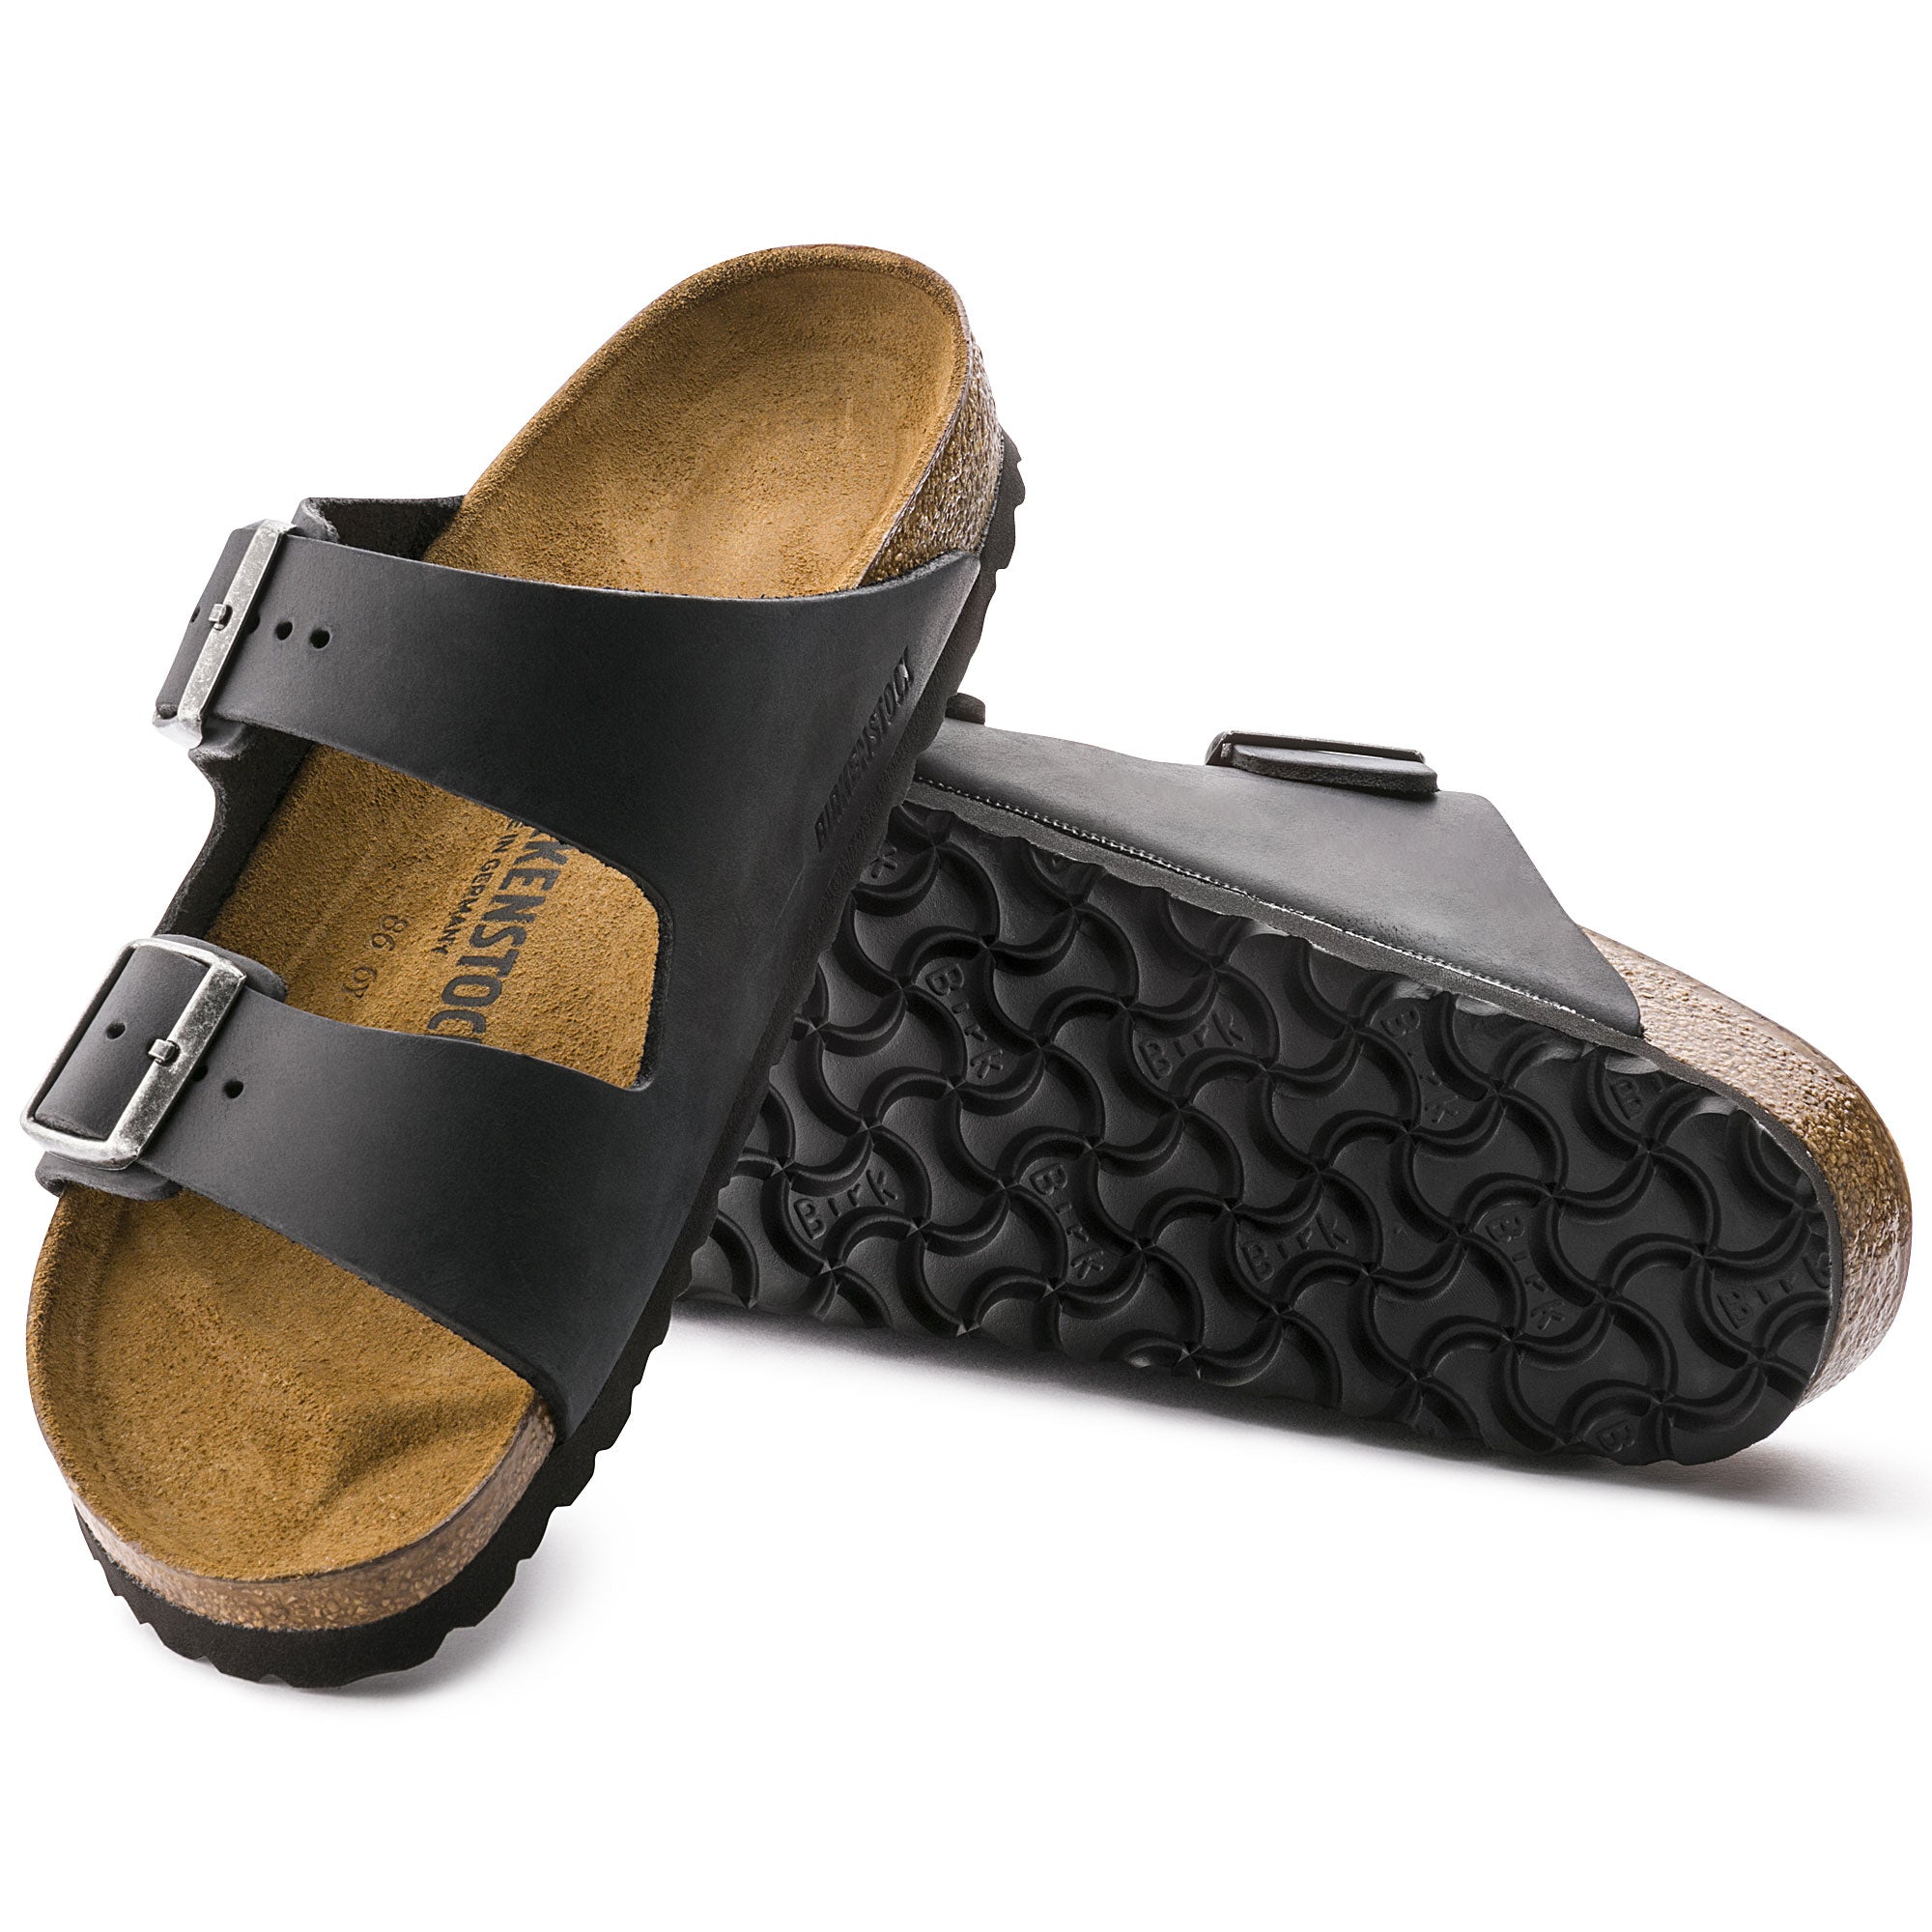 Arizona Oiled Leather in Black (Classic Footbed - Suede Lined)